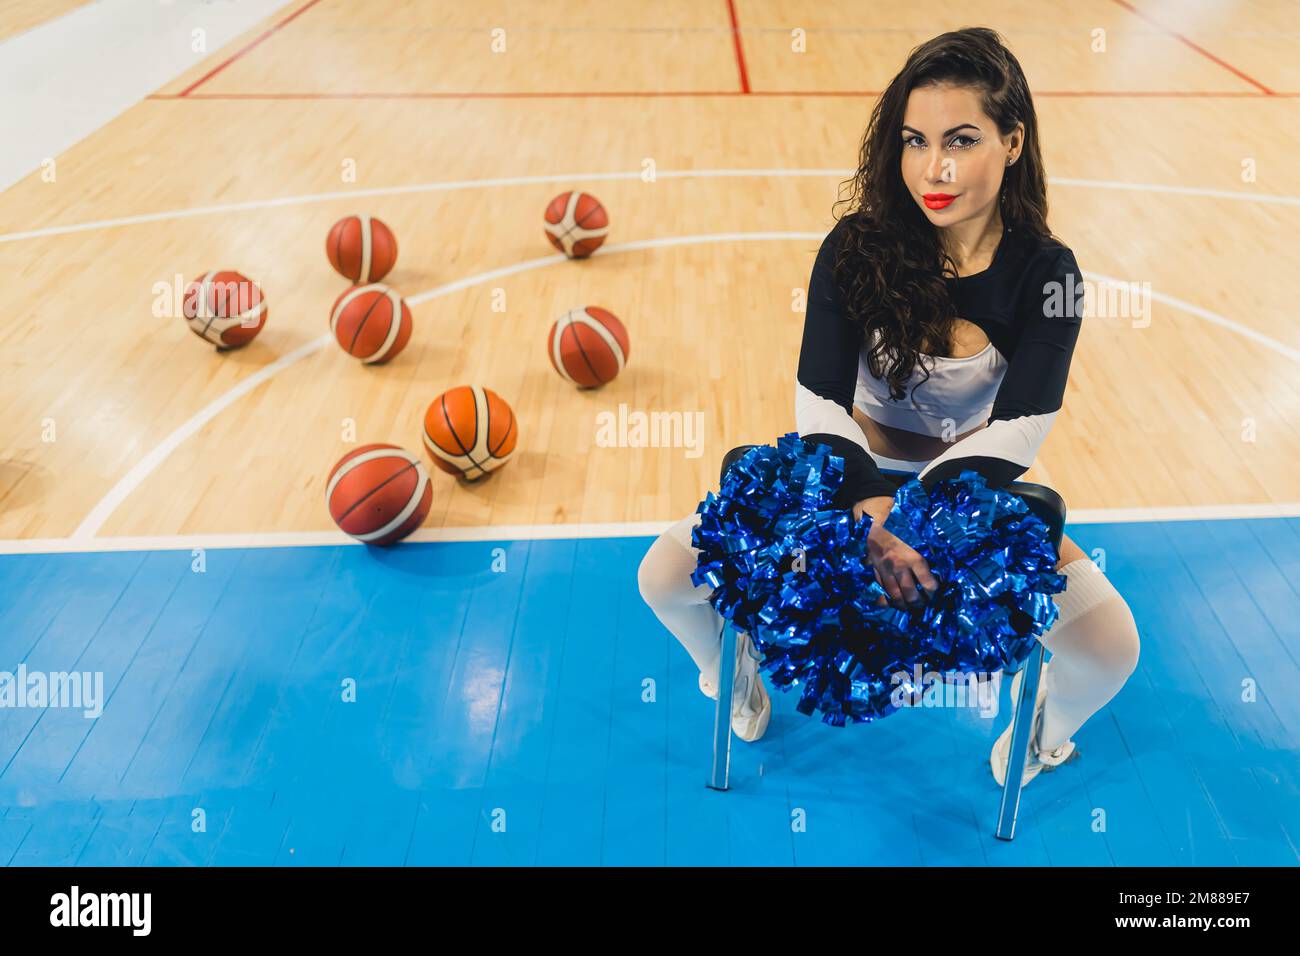 An attractive cheerleader sits confidently, holding her pom-poms. She is dressed in a black shirt and knee-high socks. A sense of power and energy. A pile of basketballs can be seen behind her. Stock Photo